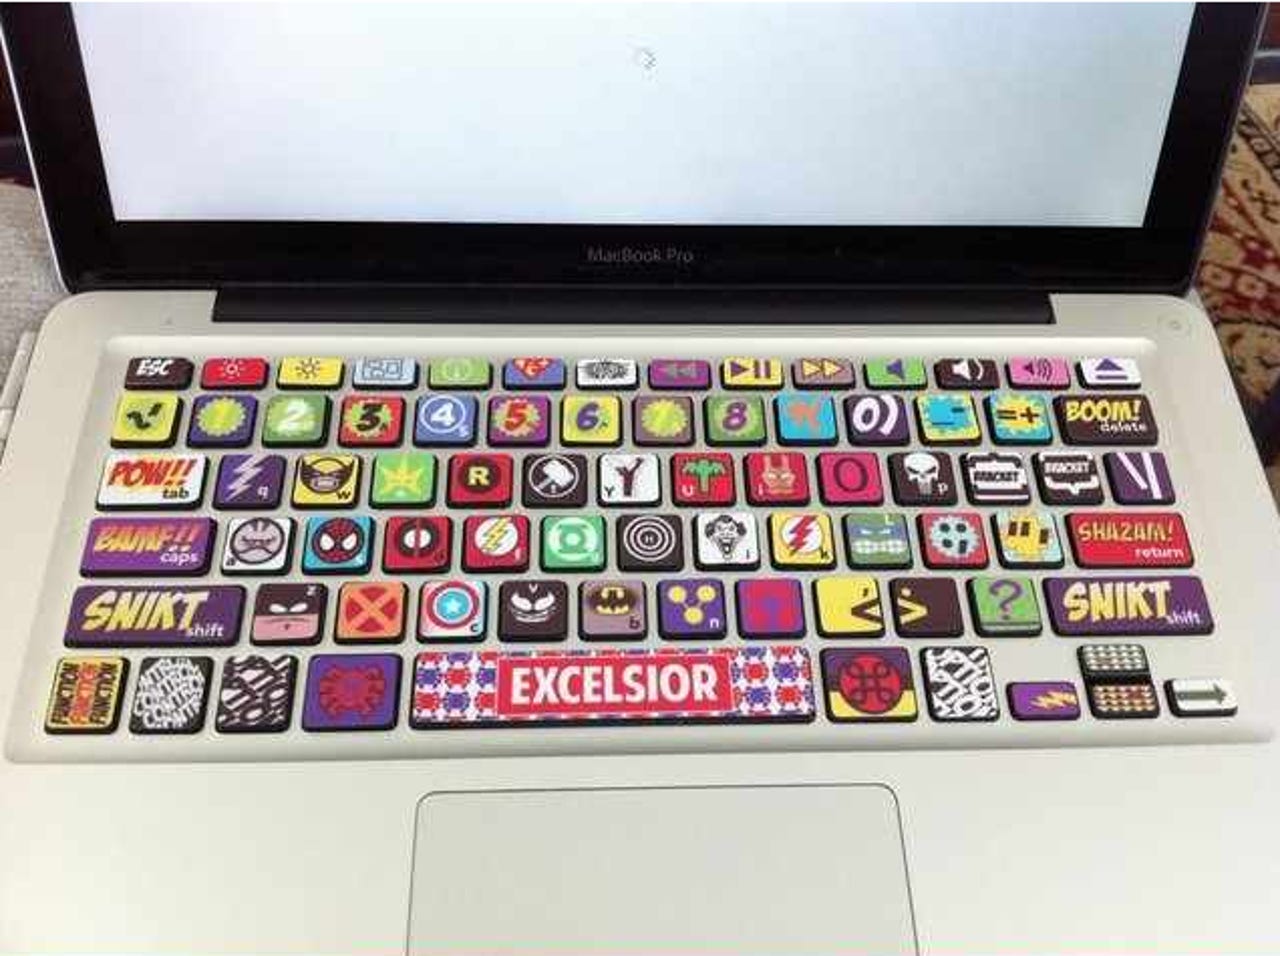 Keyboard Stickers Turn Laptops Into Iconic Paintings